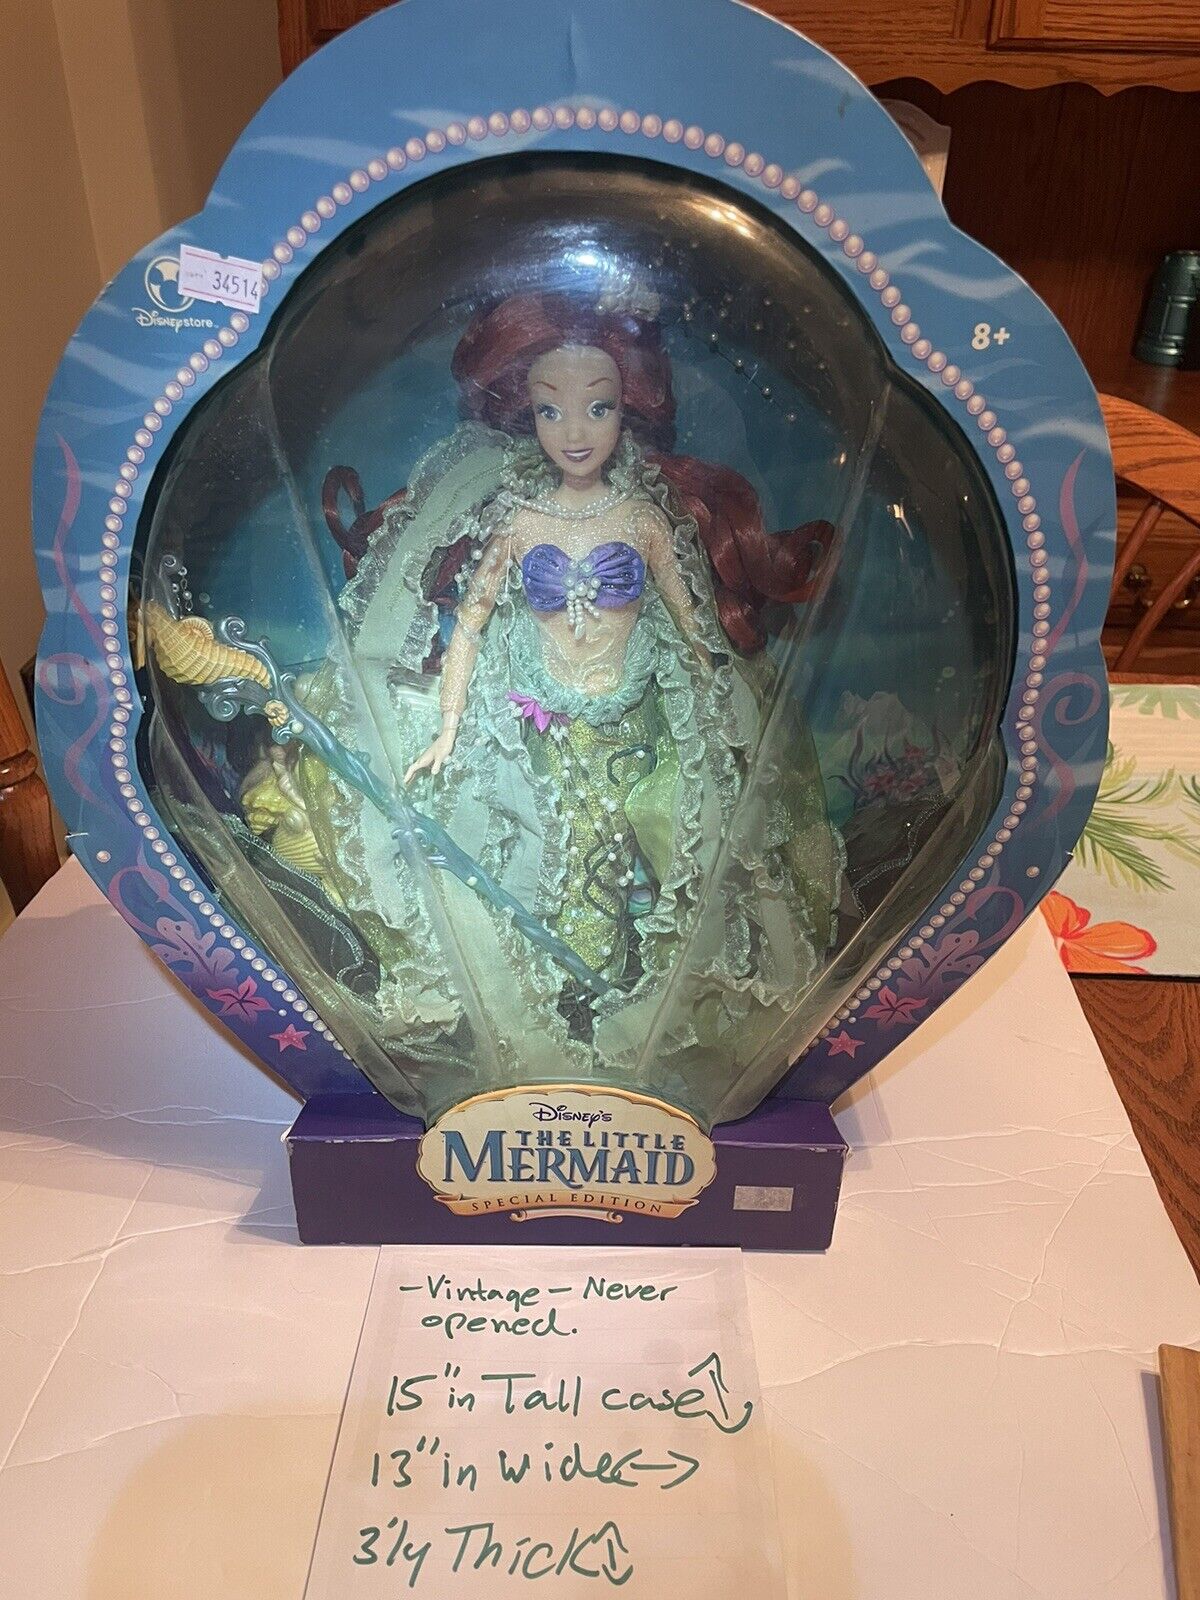 My little mermaid Ariel figurine, vintage/special collectors edition never open